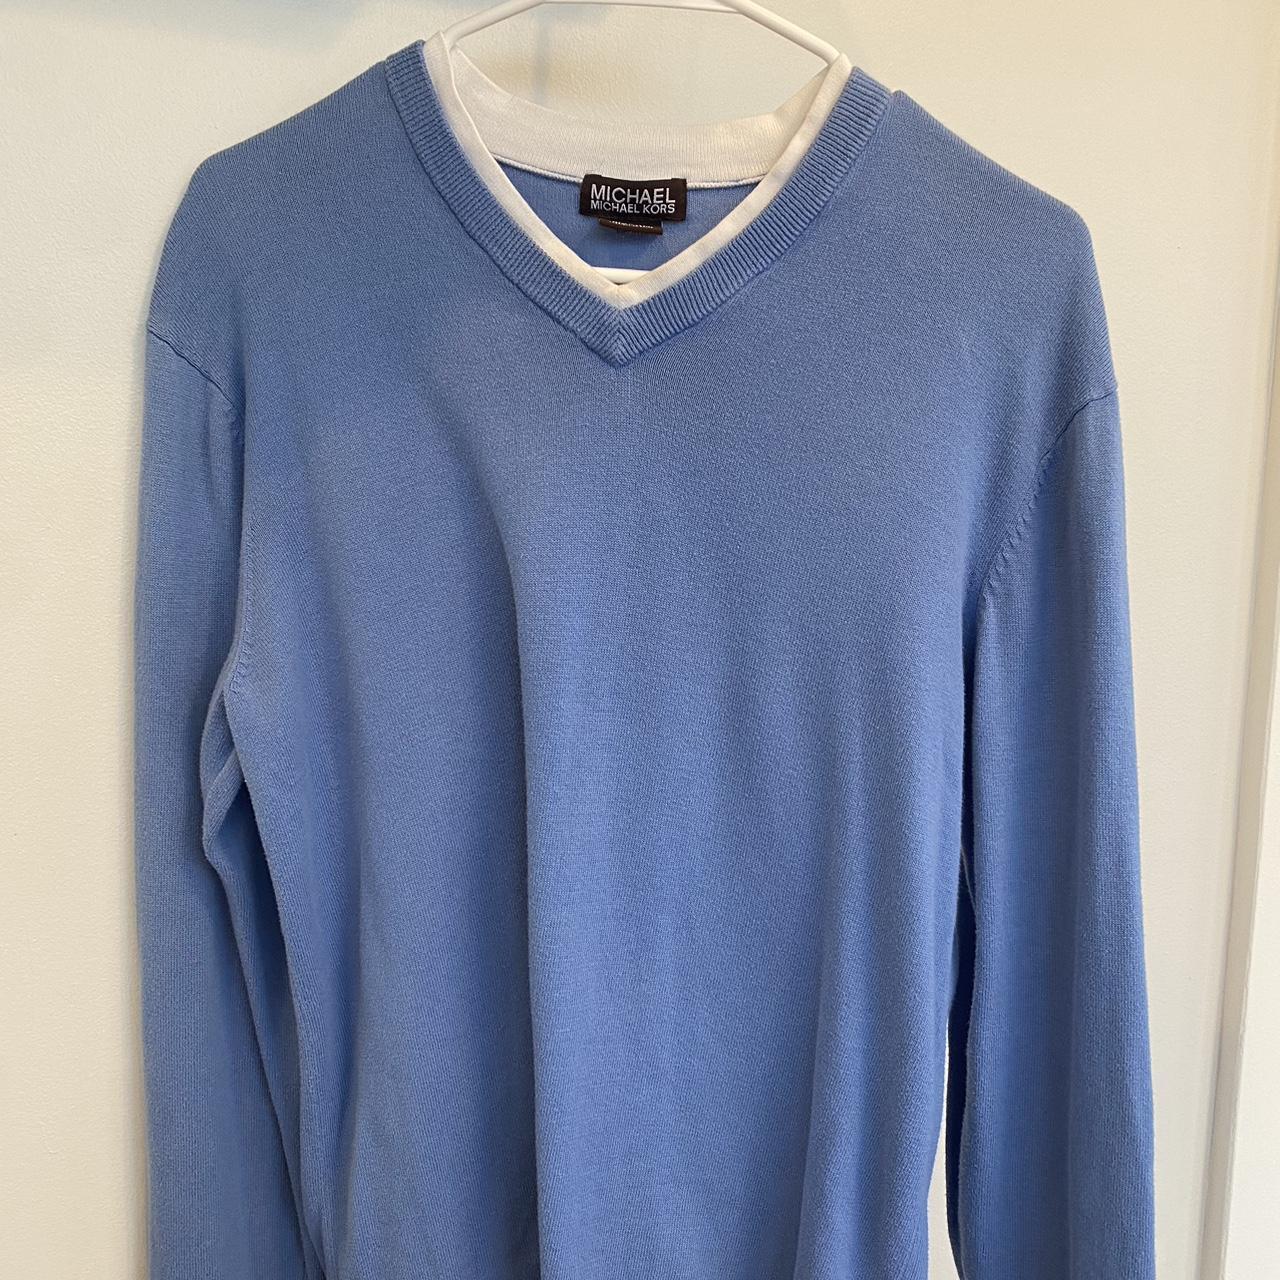 Vintage sweater by michael Kors 🩵 100% cotton and... - Depop